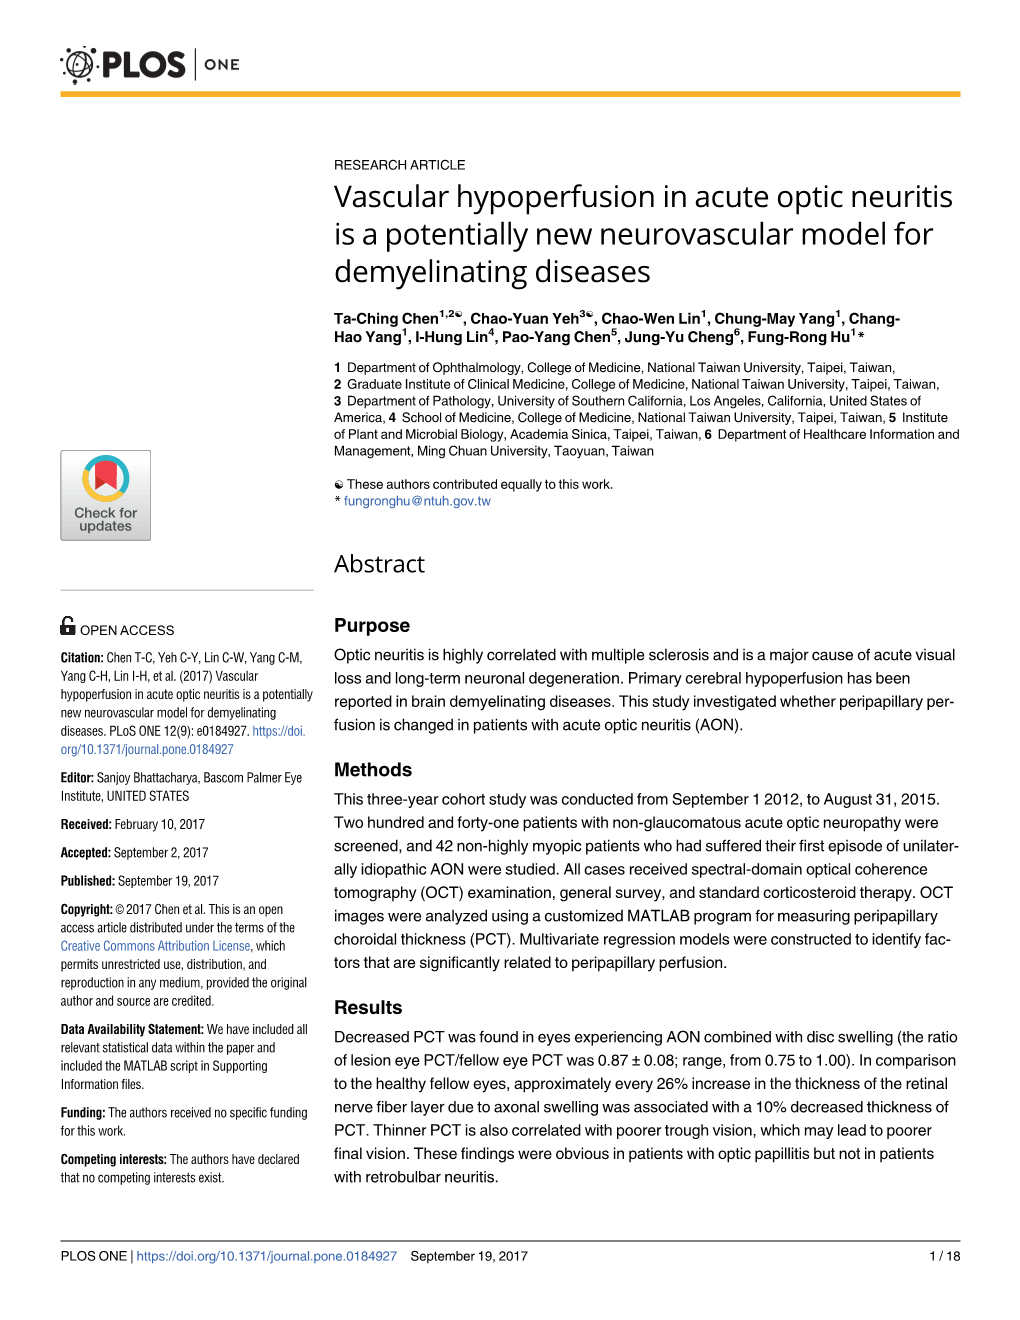 Vascular Hypoperfusion in Acute Optic Neuritis Is a Potentially New Neurovascular Model for Demyelinating Diseases